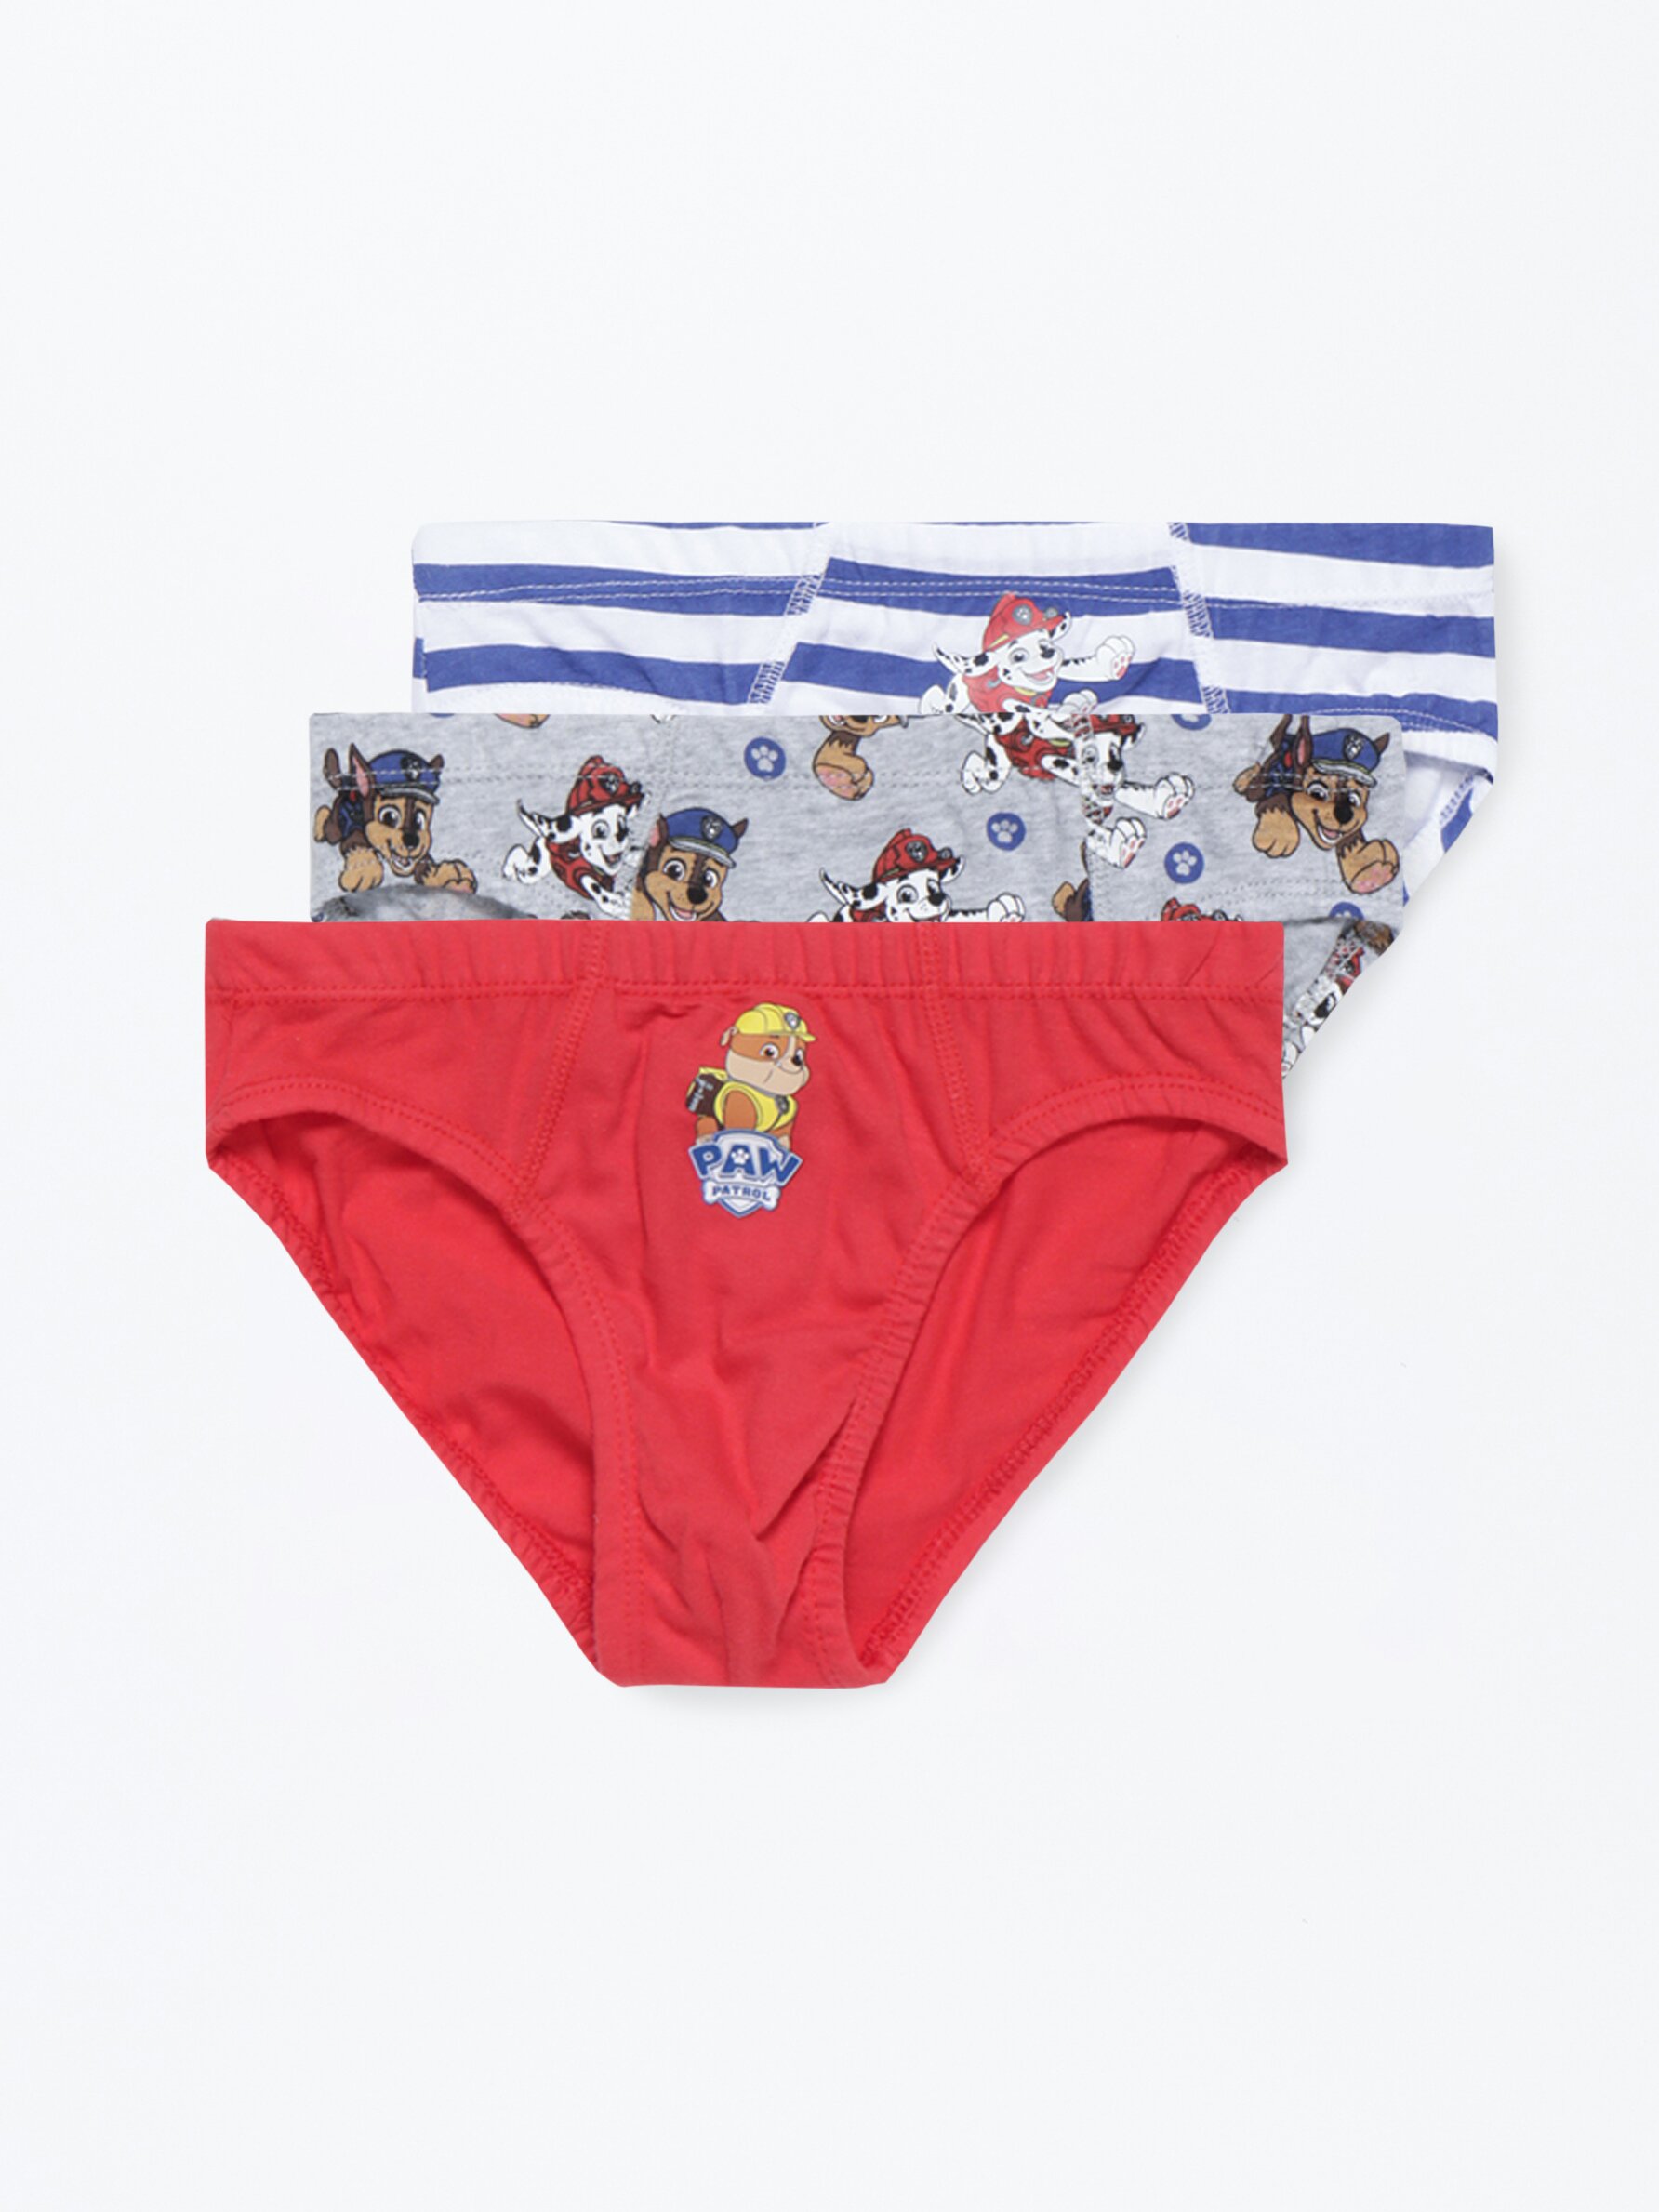 3-pack of PAW Patrol ©Nickelodeon briefs - Collabs - ACCESSORIES